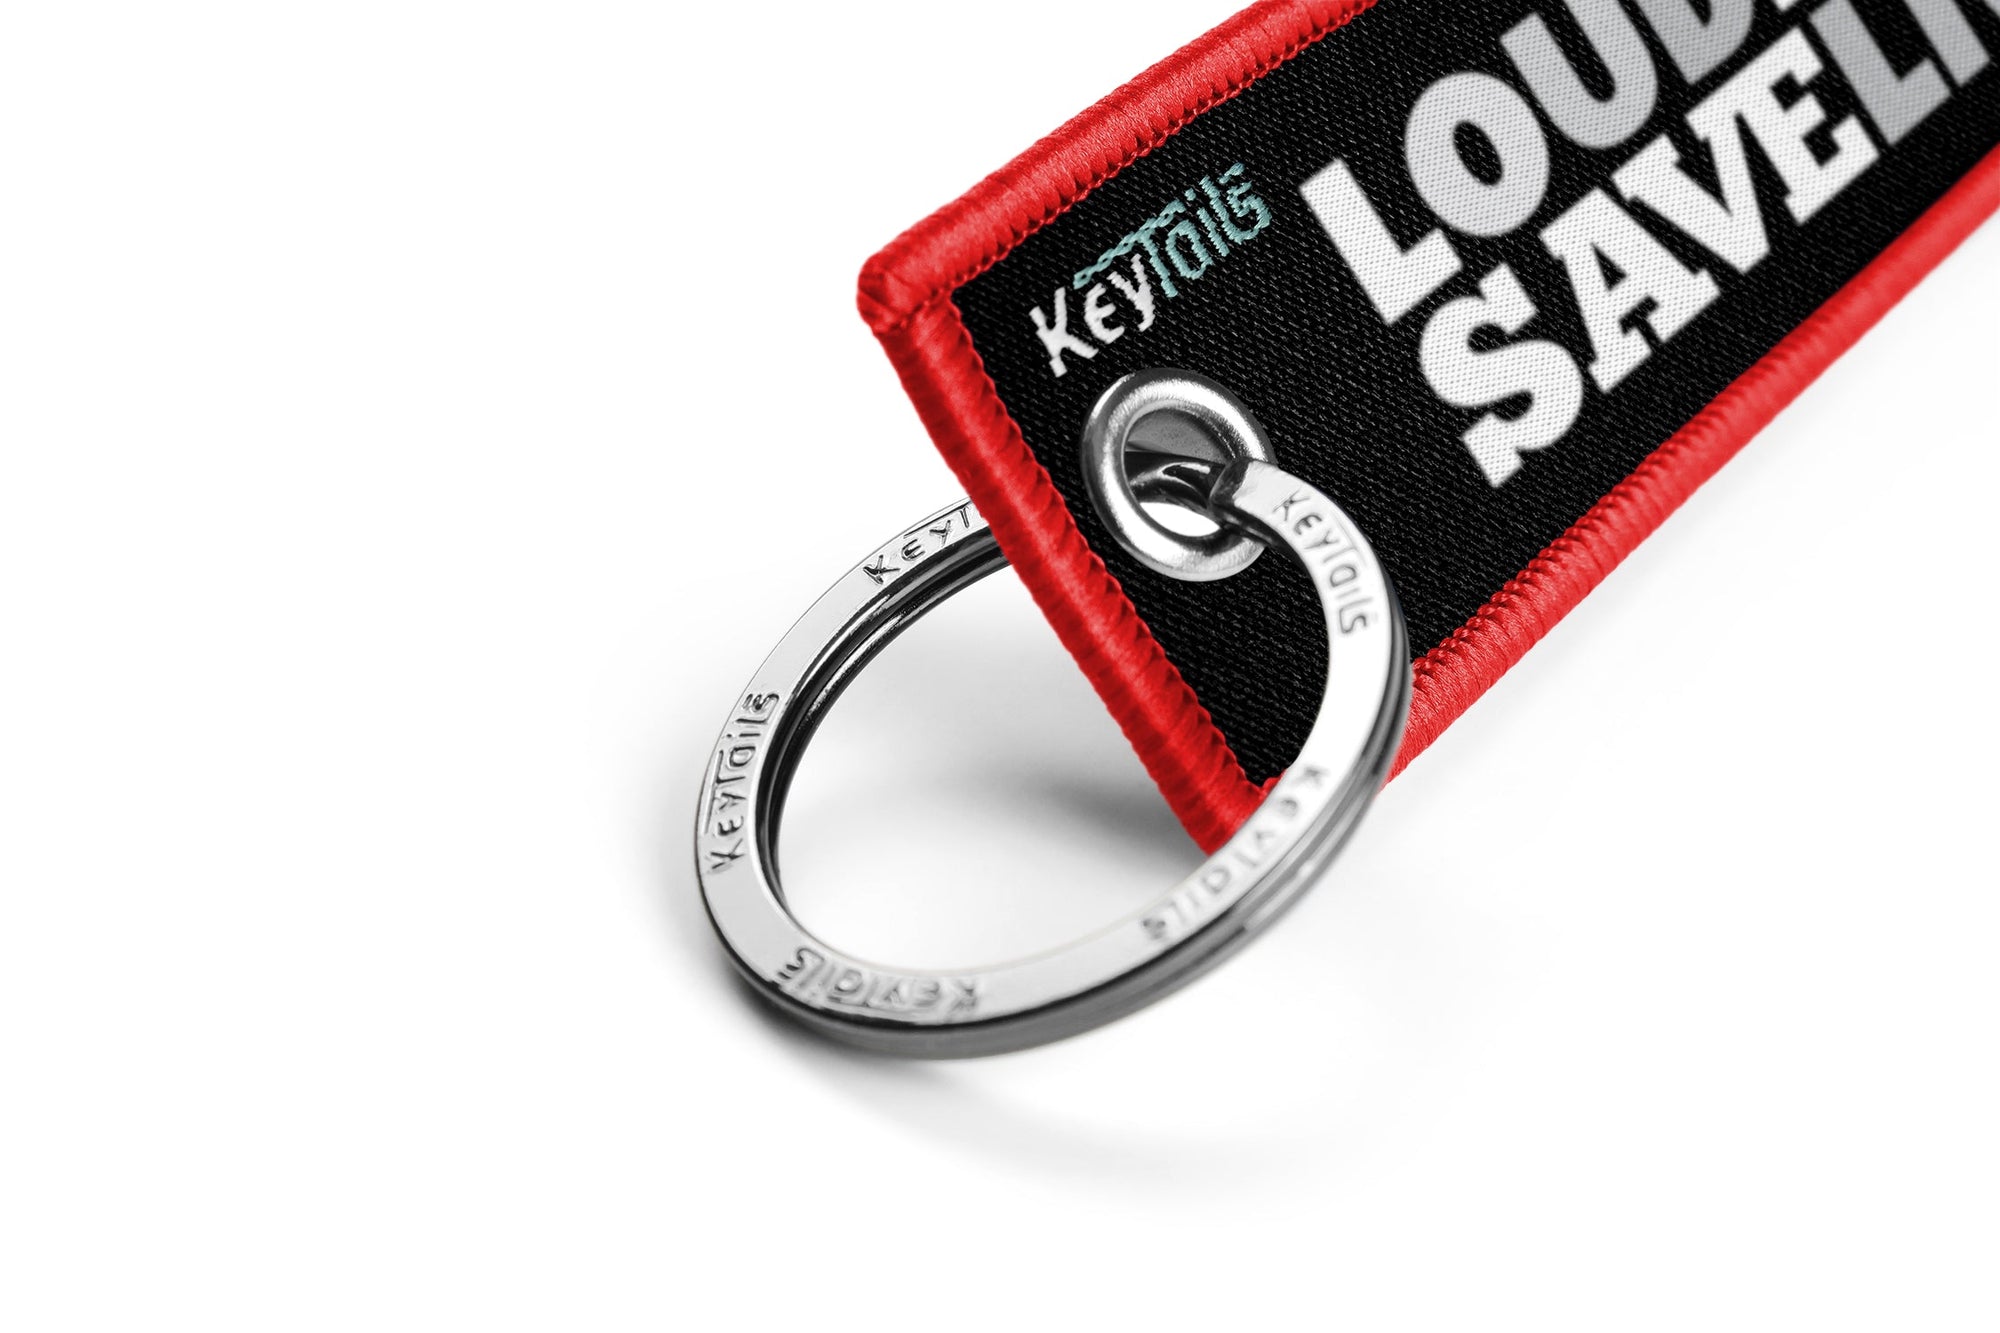 Loud Pipes Save Lives Keychain, Key Tag - Red